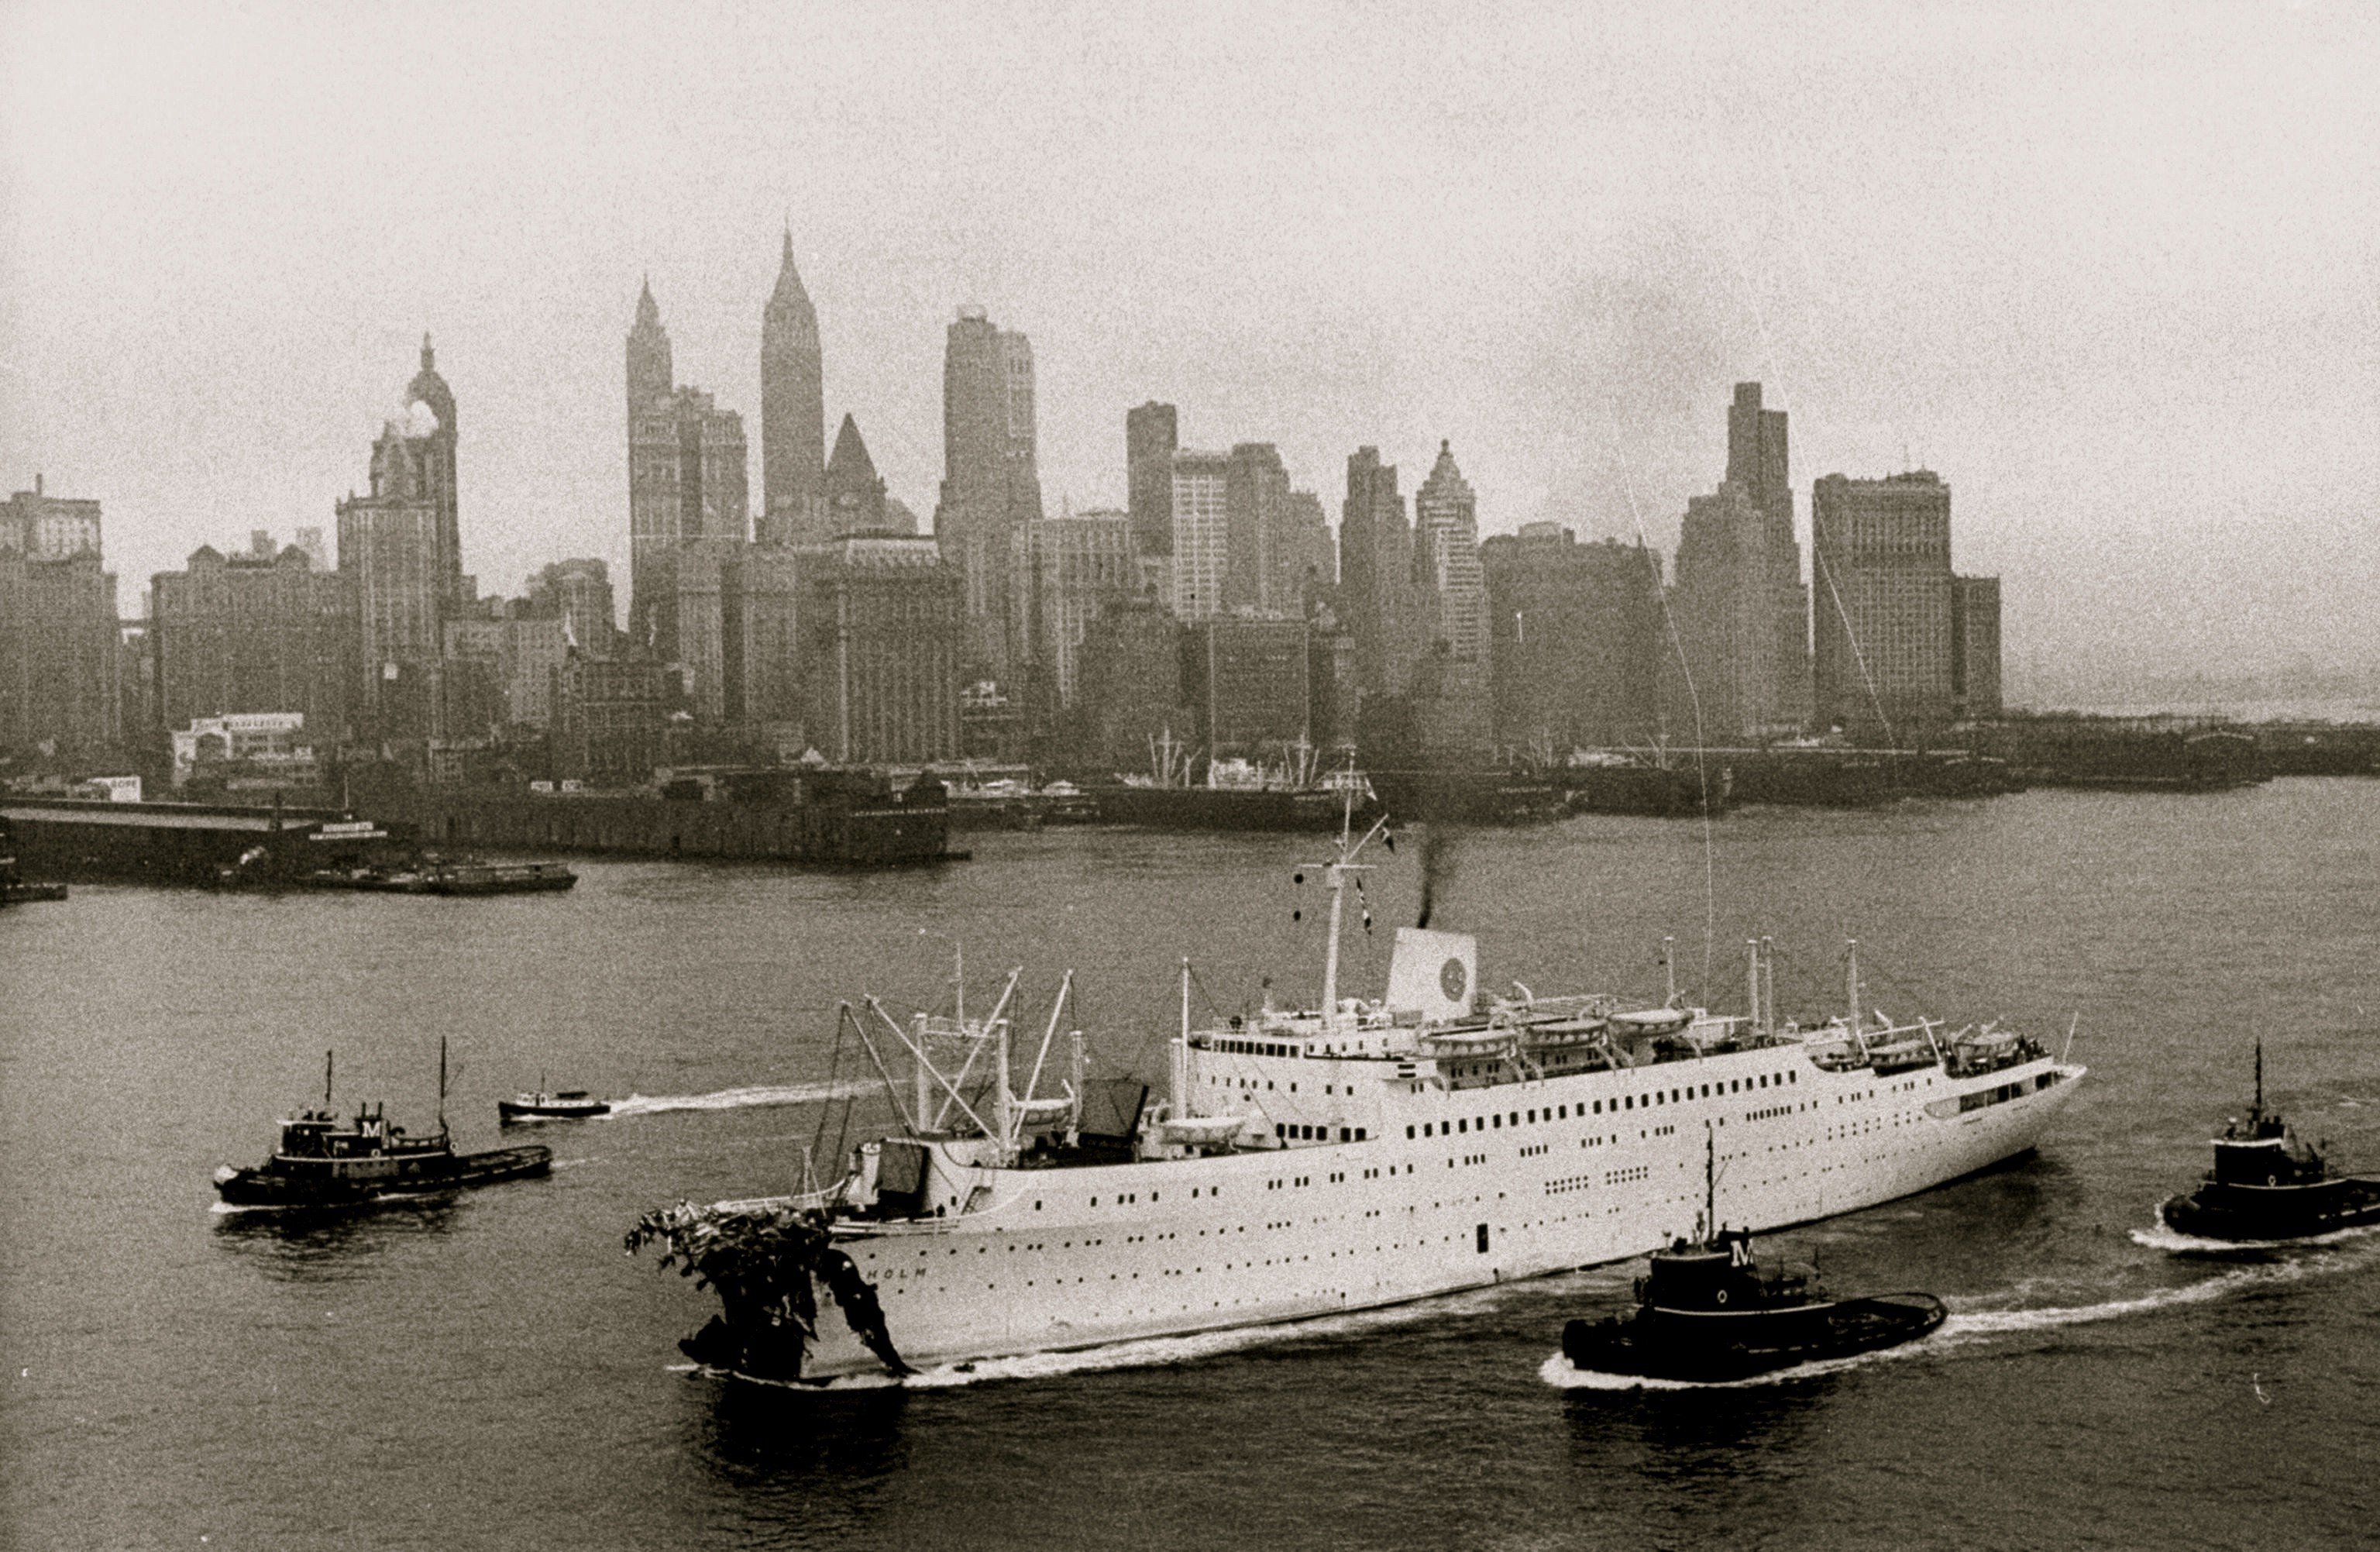 Handout image shows the MS Stockholm (now the MV Astoria) in New York after a collision with the SS Andrea Doria.